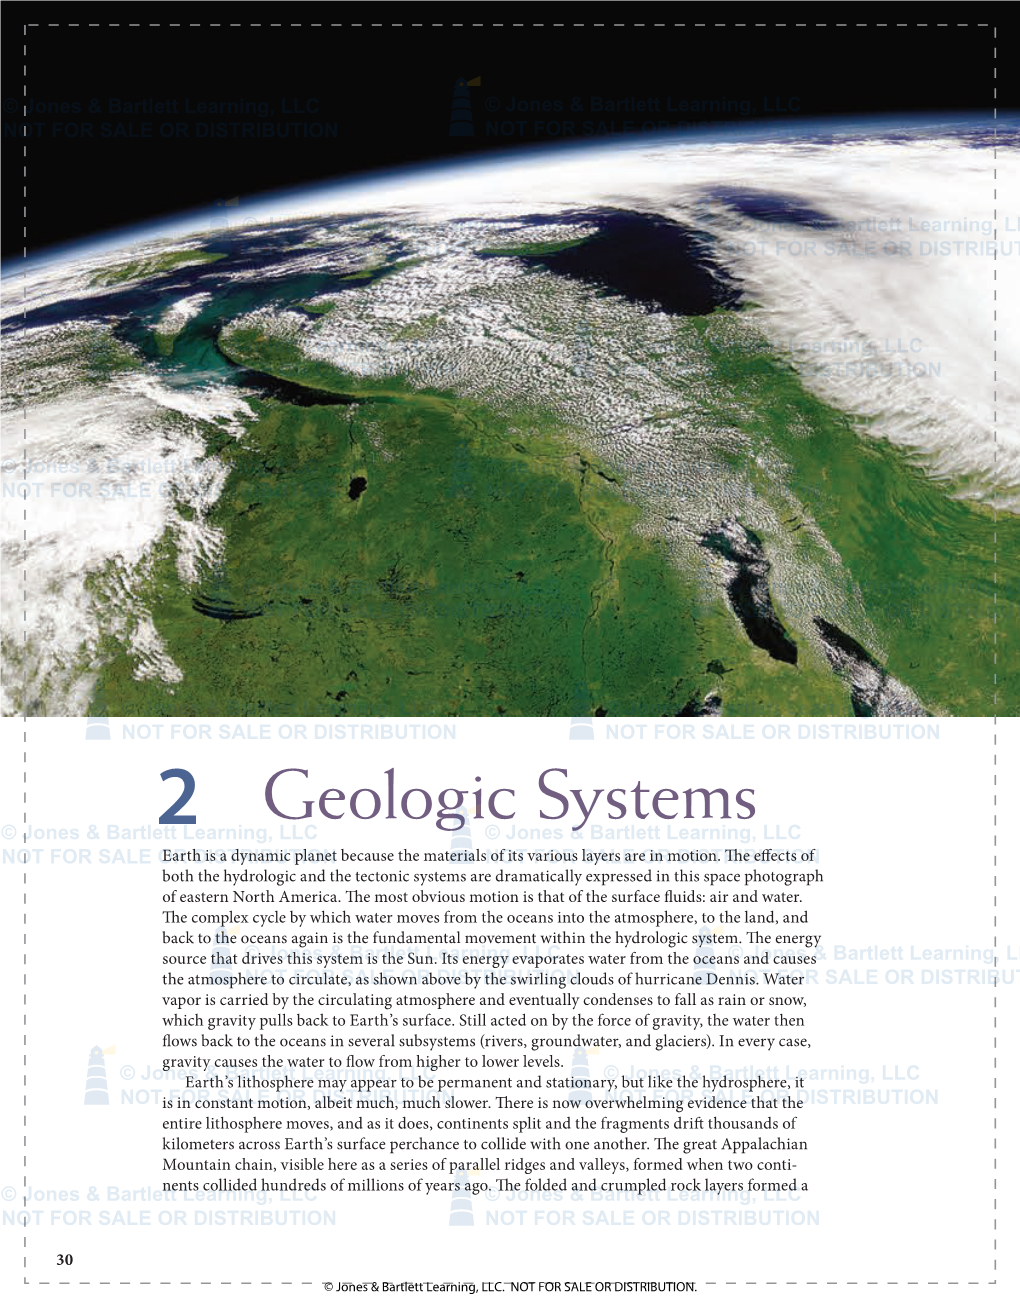 Geologic Systems